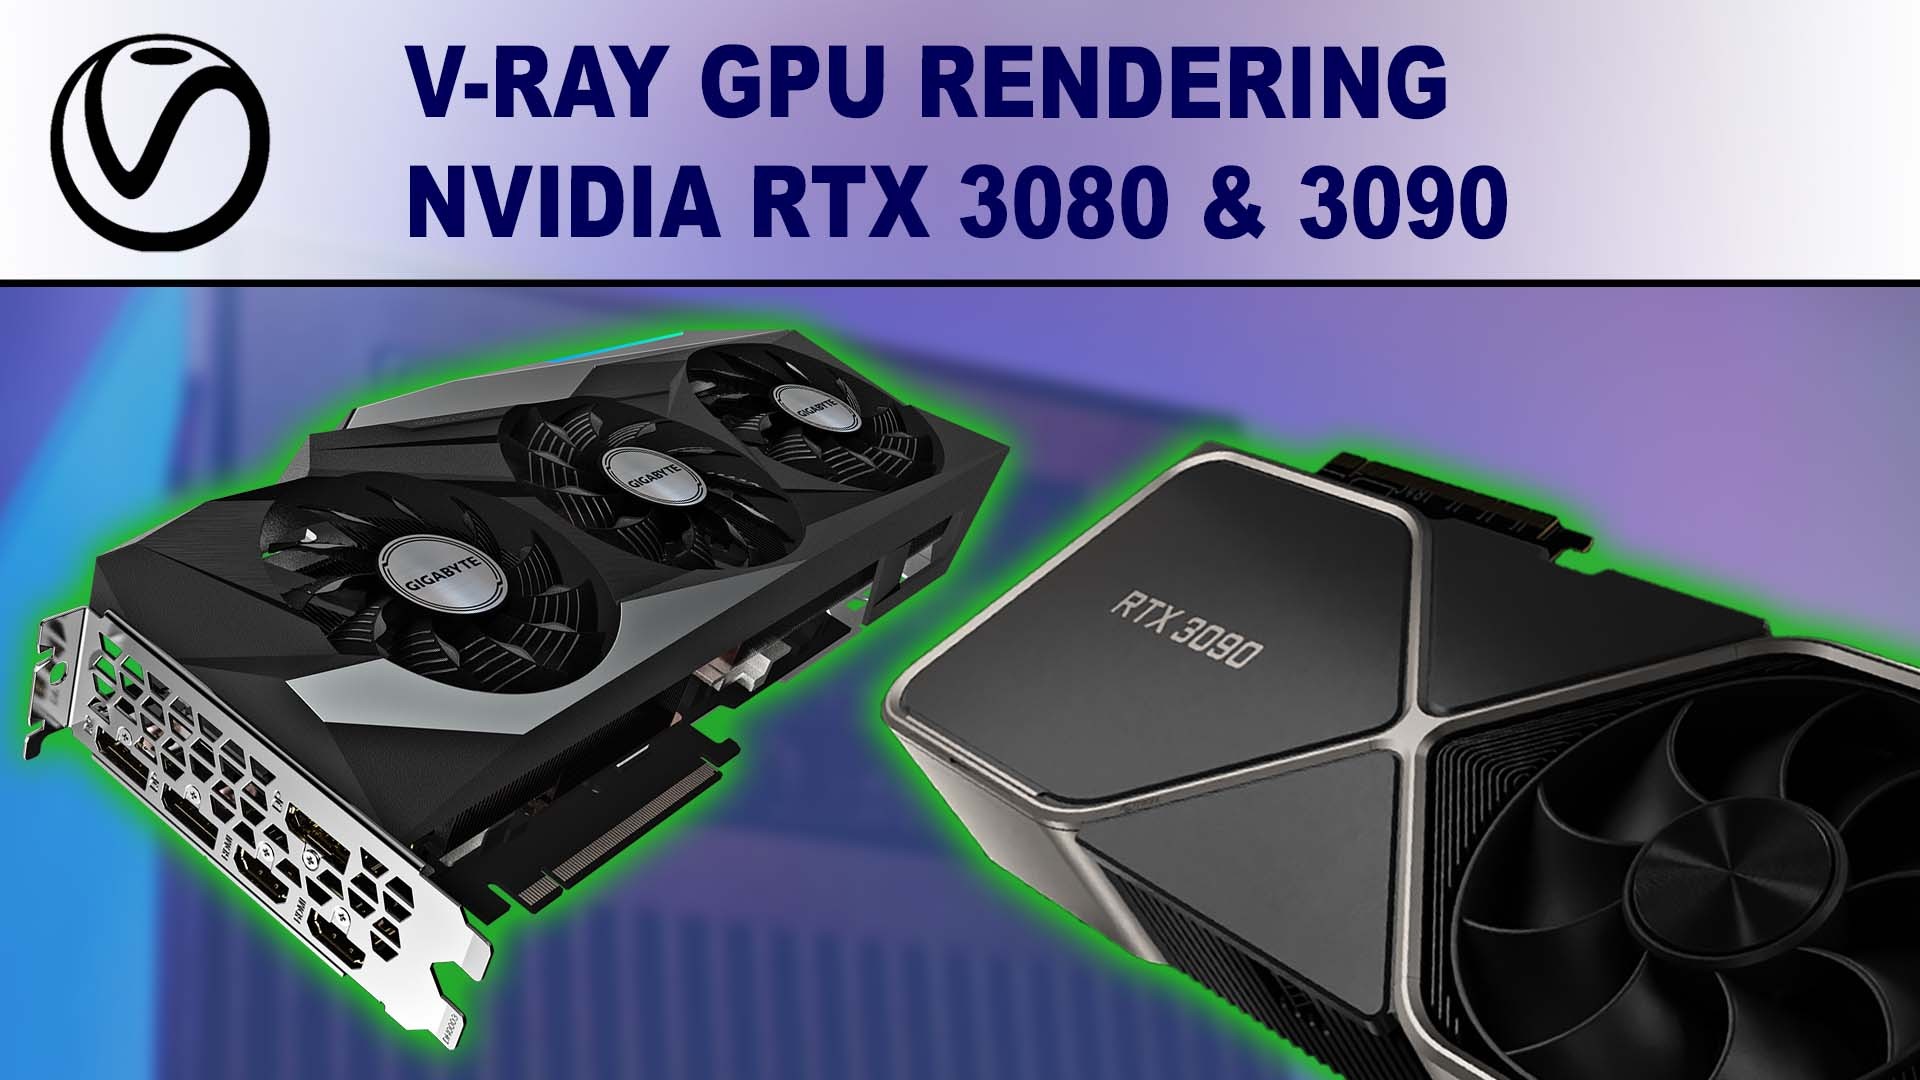 V-Ray GPU Rendering Performance Review for NVIDIA GeForce RTX 3080 10GB & 3090 24GB